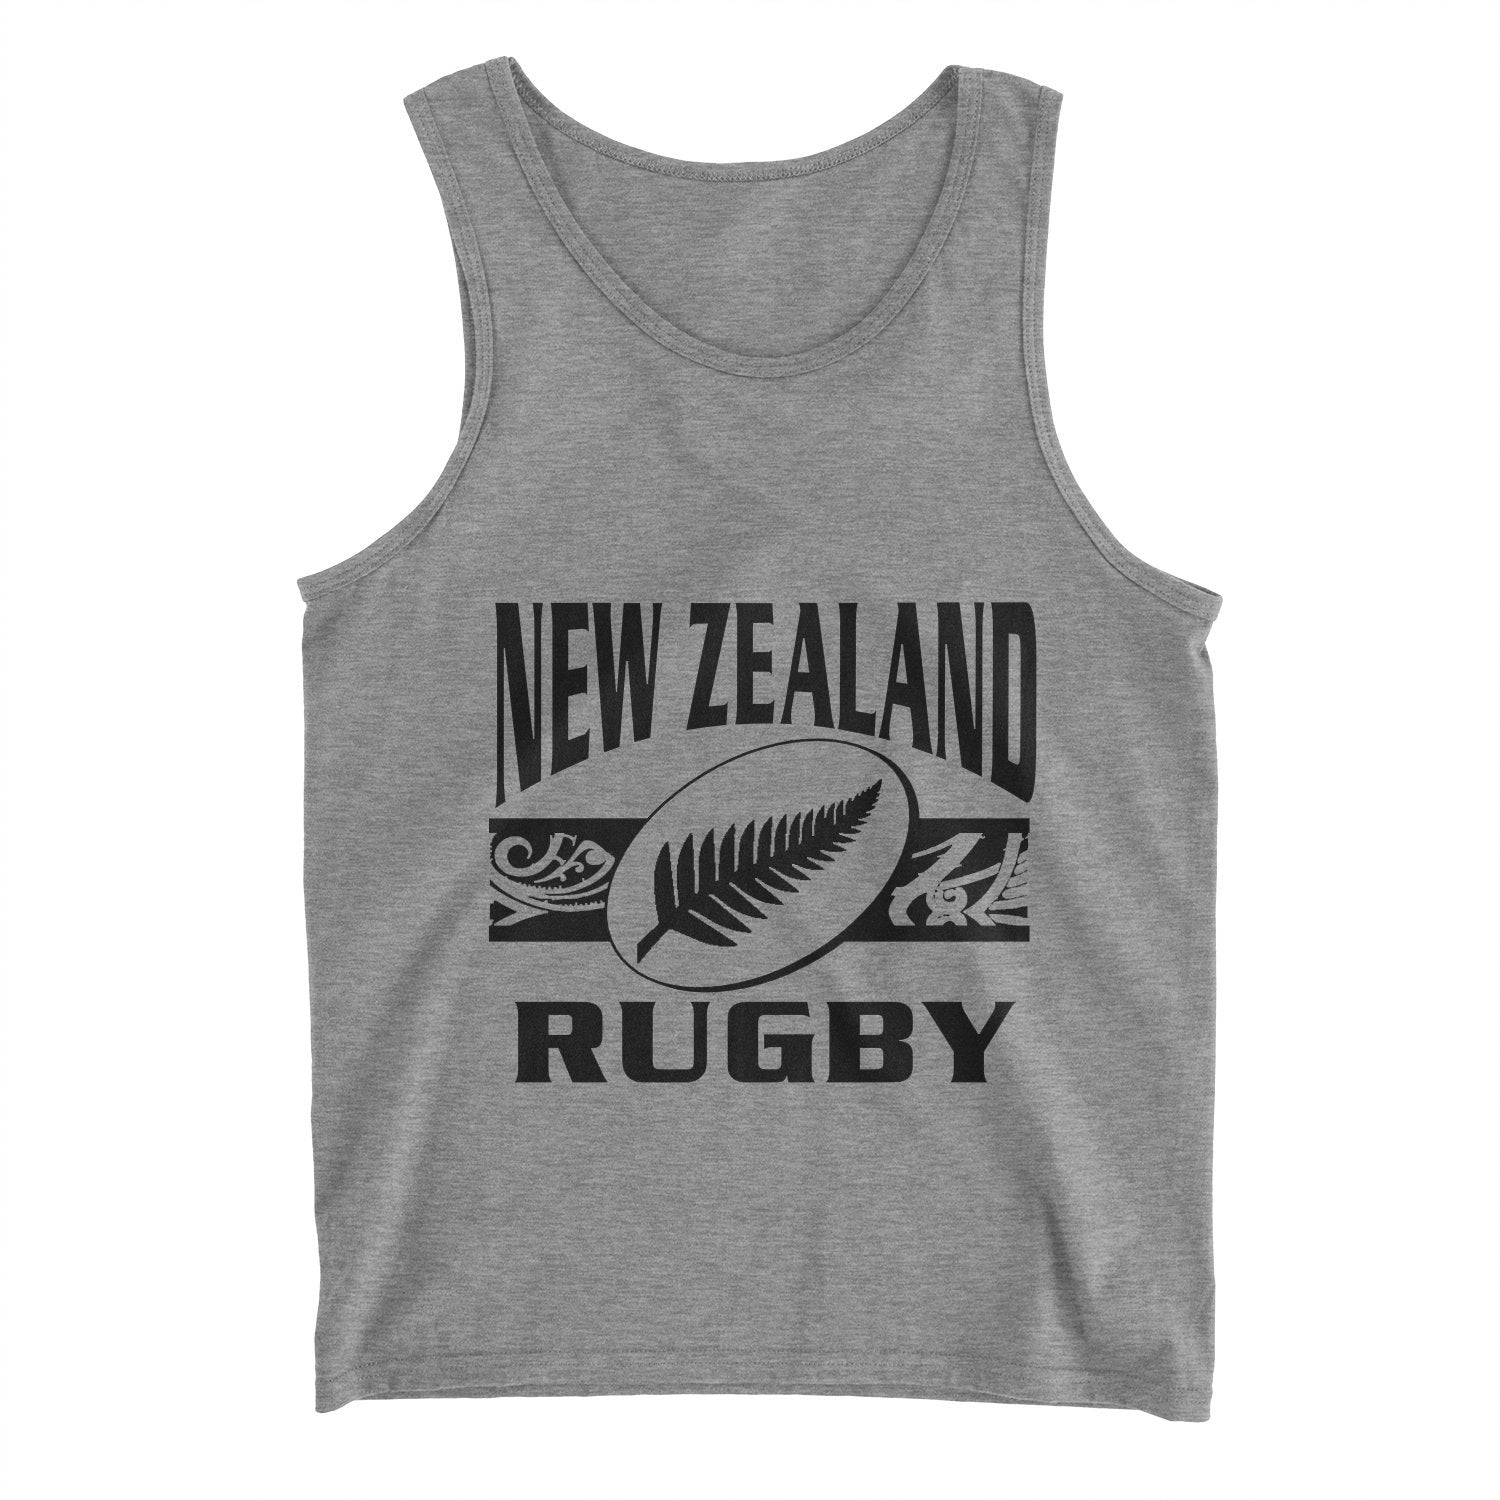 Graphic Tees - New Zealand Rugby Tank Top